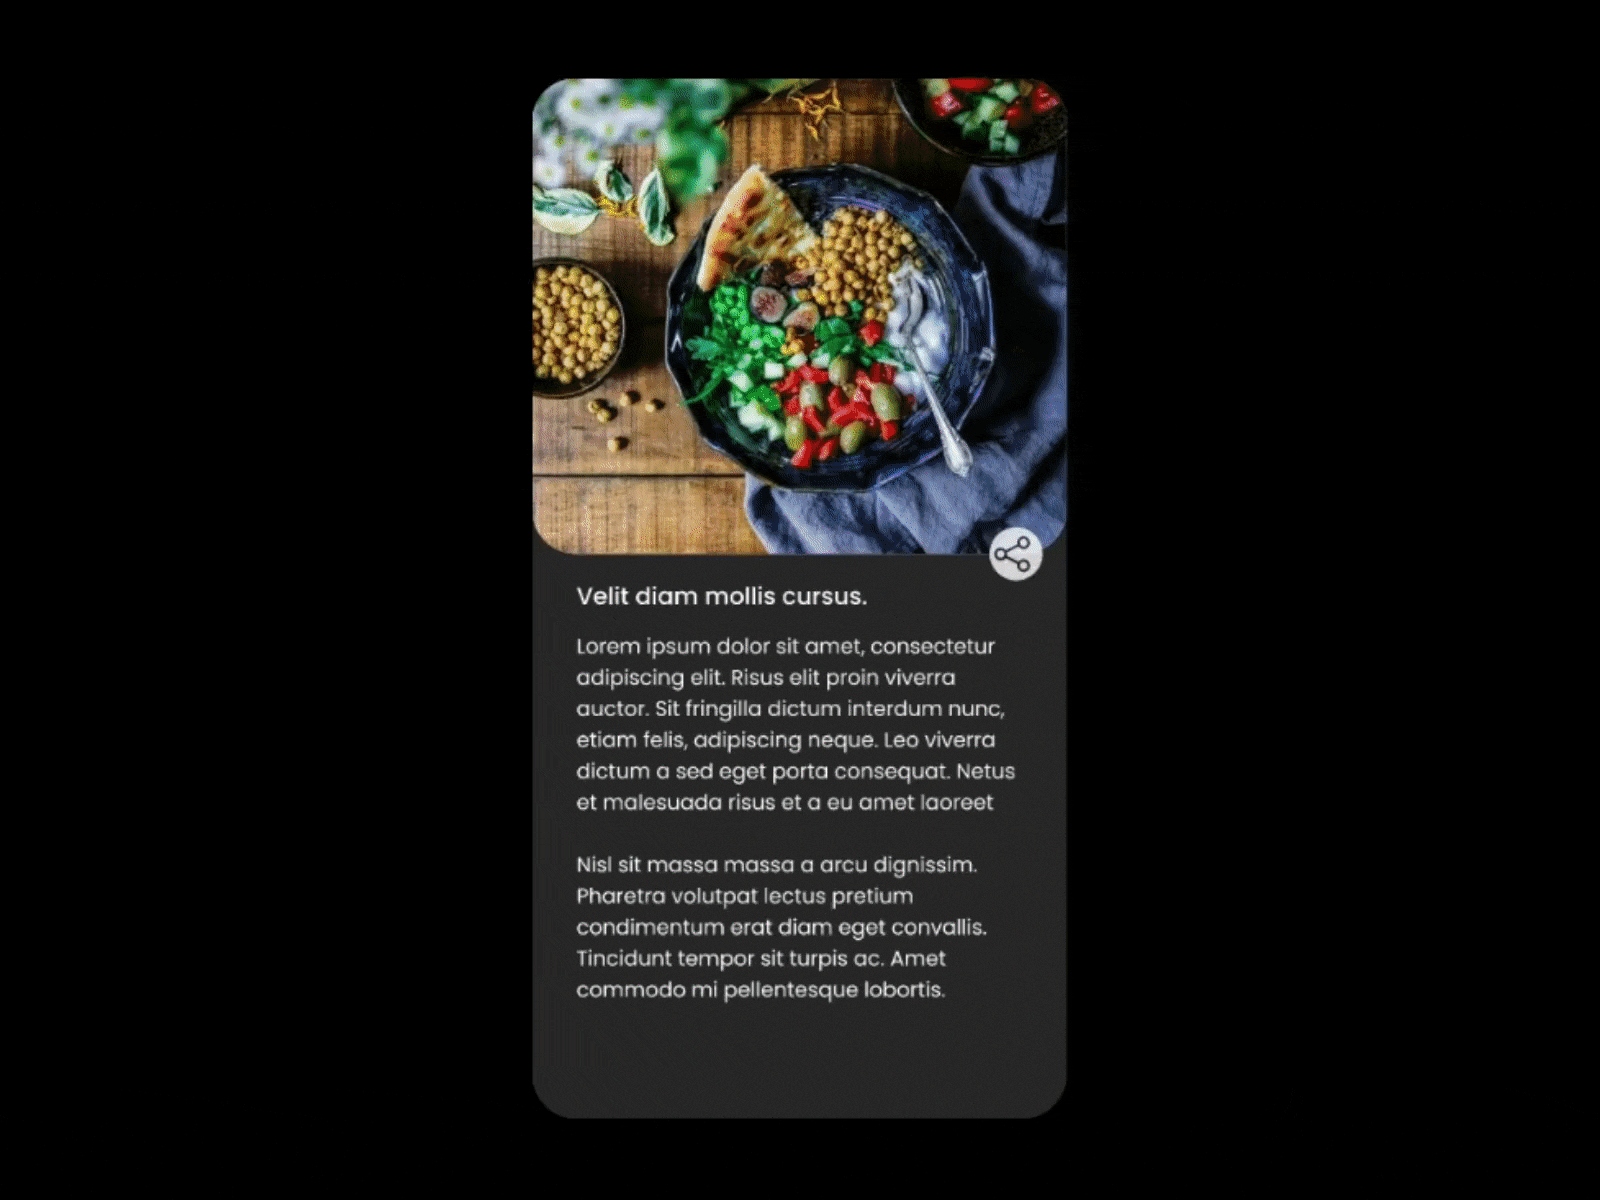 Share button - #DailyUI #010 adobexd android dailyui dailyui010 dailyuichallenge design figma figmadesign interaction design microinteraction productdesign prototype tech transition ui user experience userinterface uxui